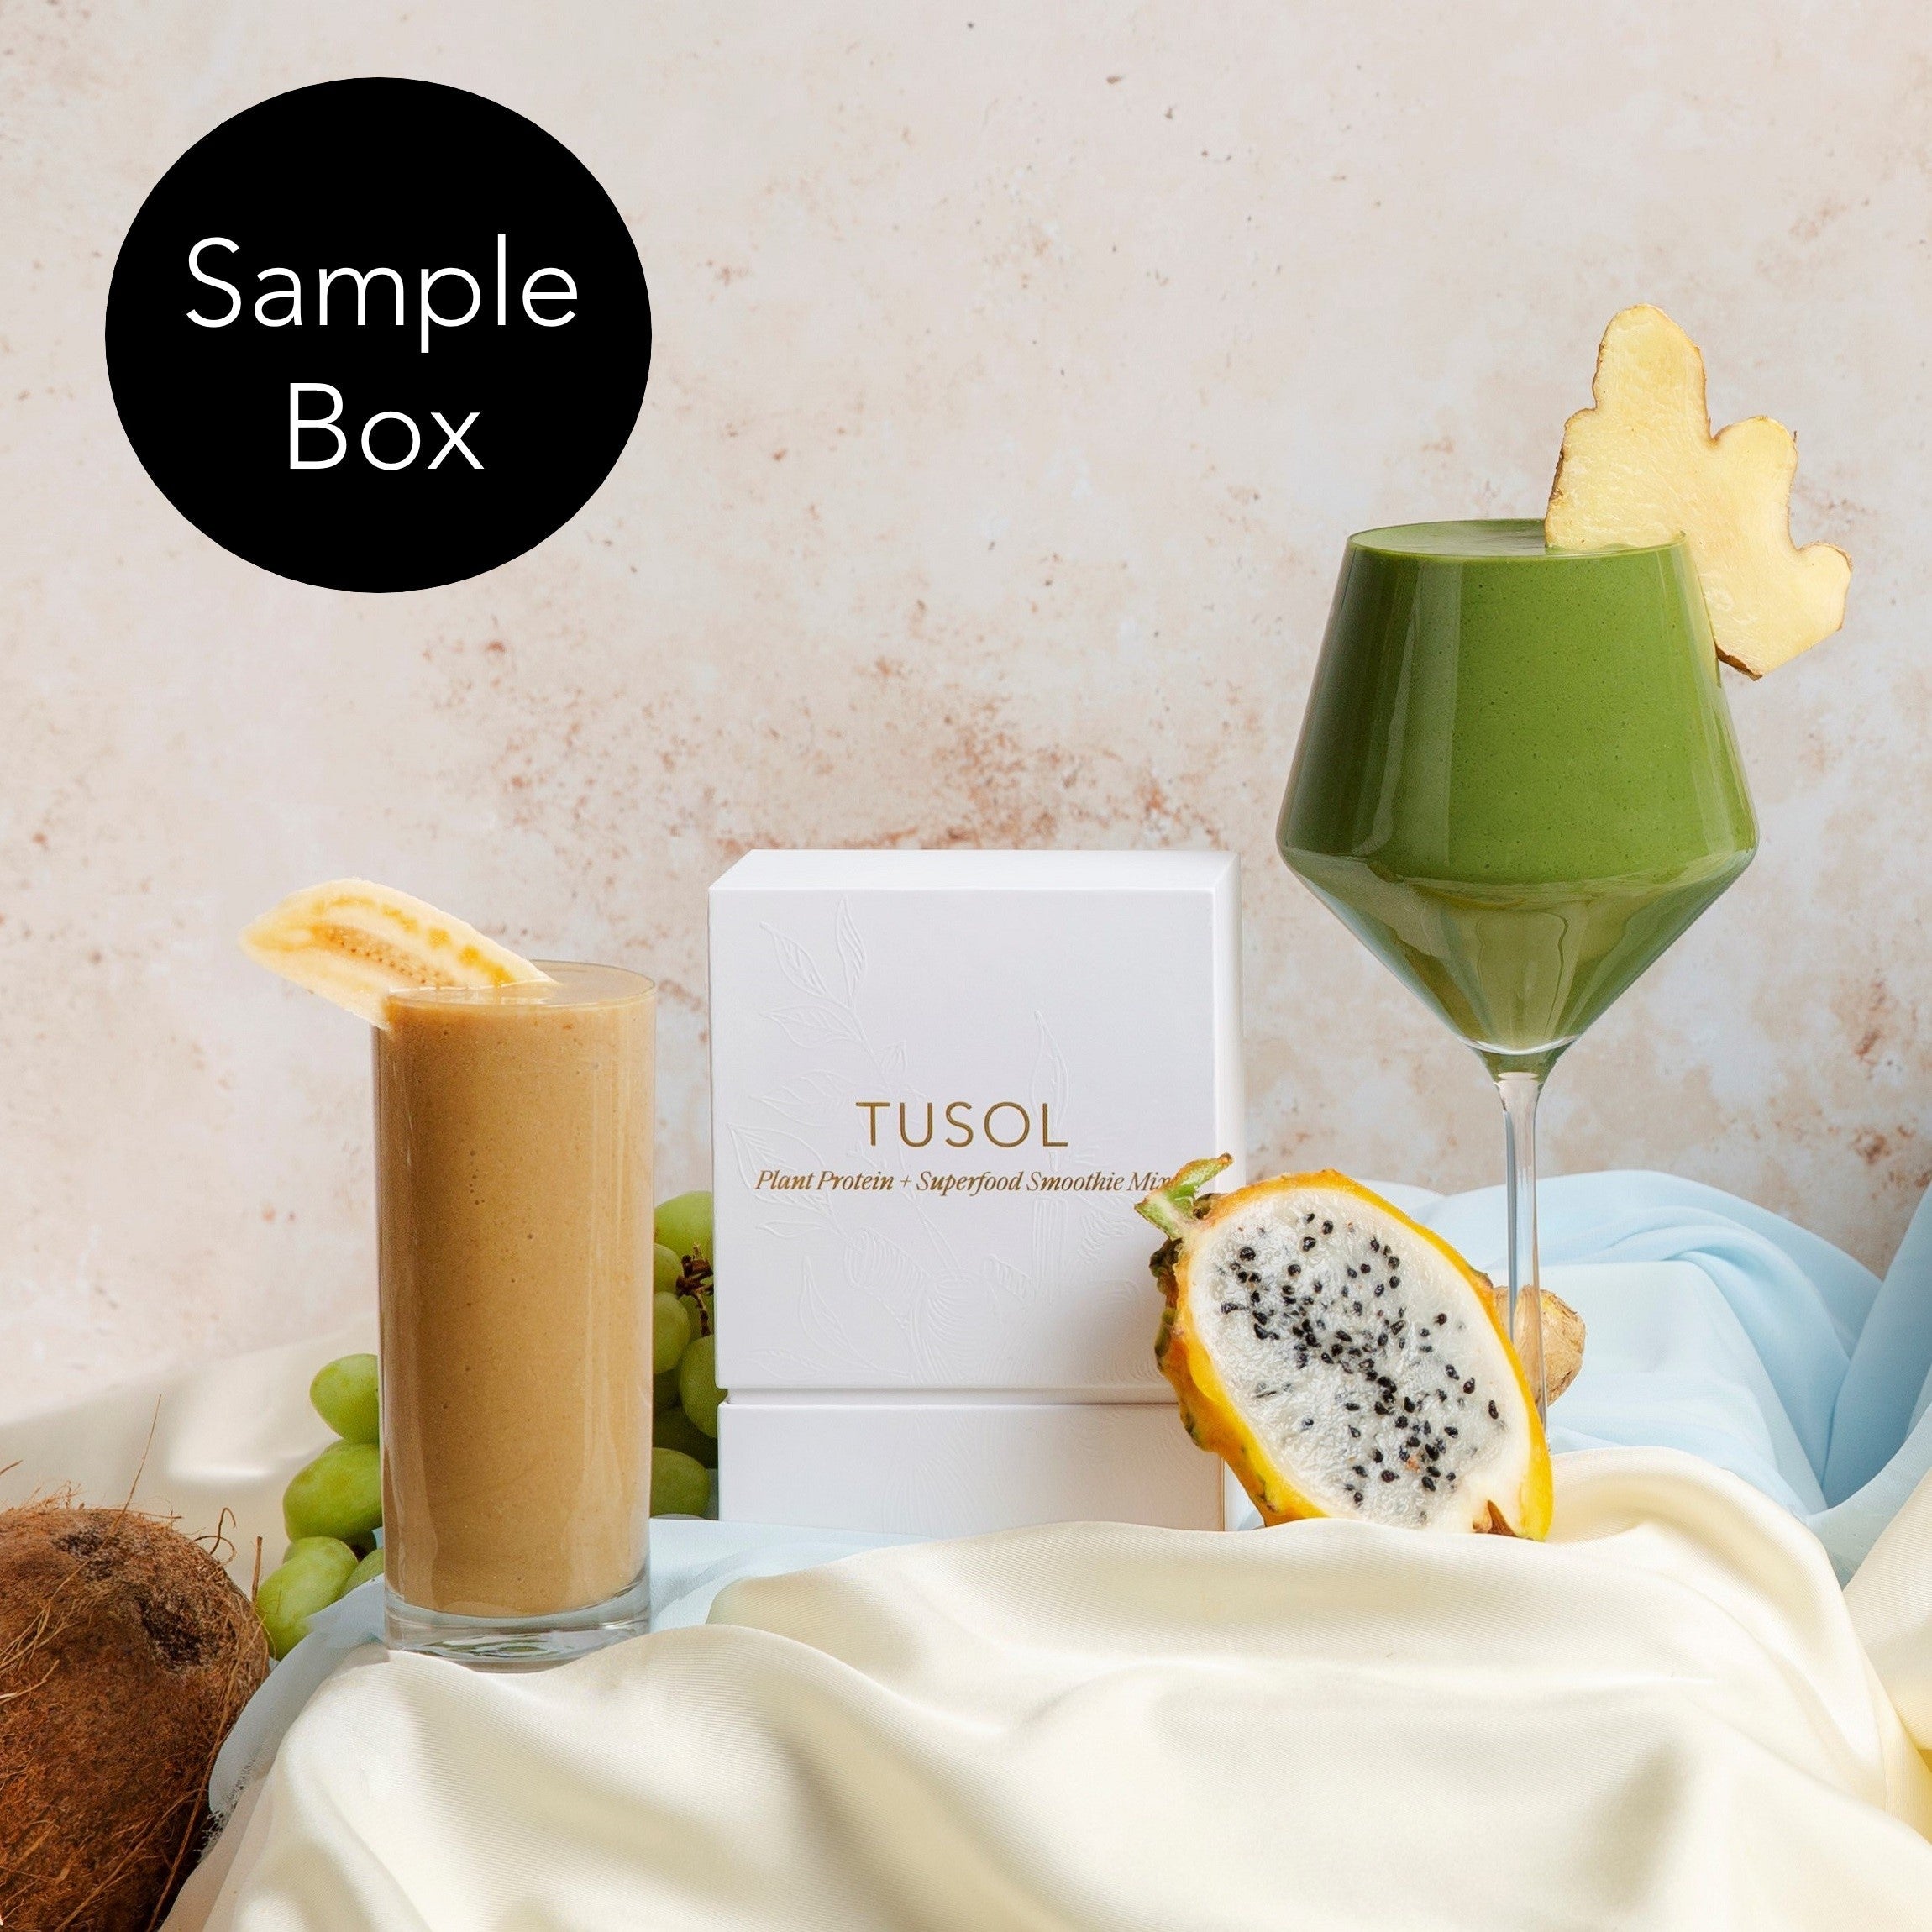 TUSOL Organic Plant Protein + Superfood Smoothie Mix | Sample Box - Multiverse